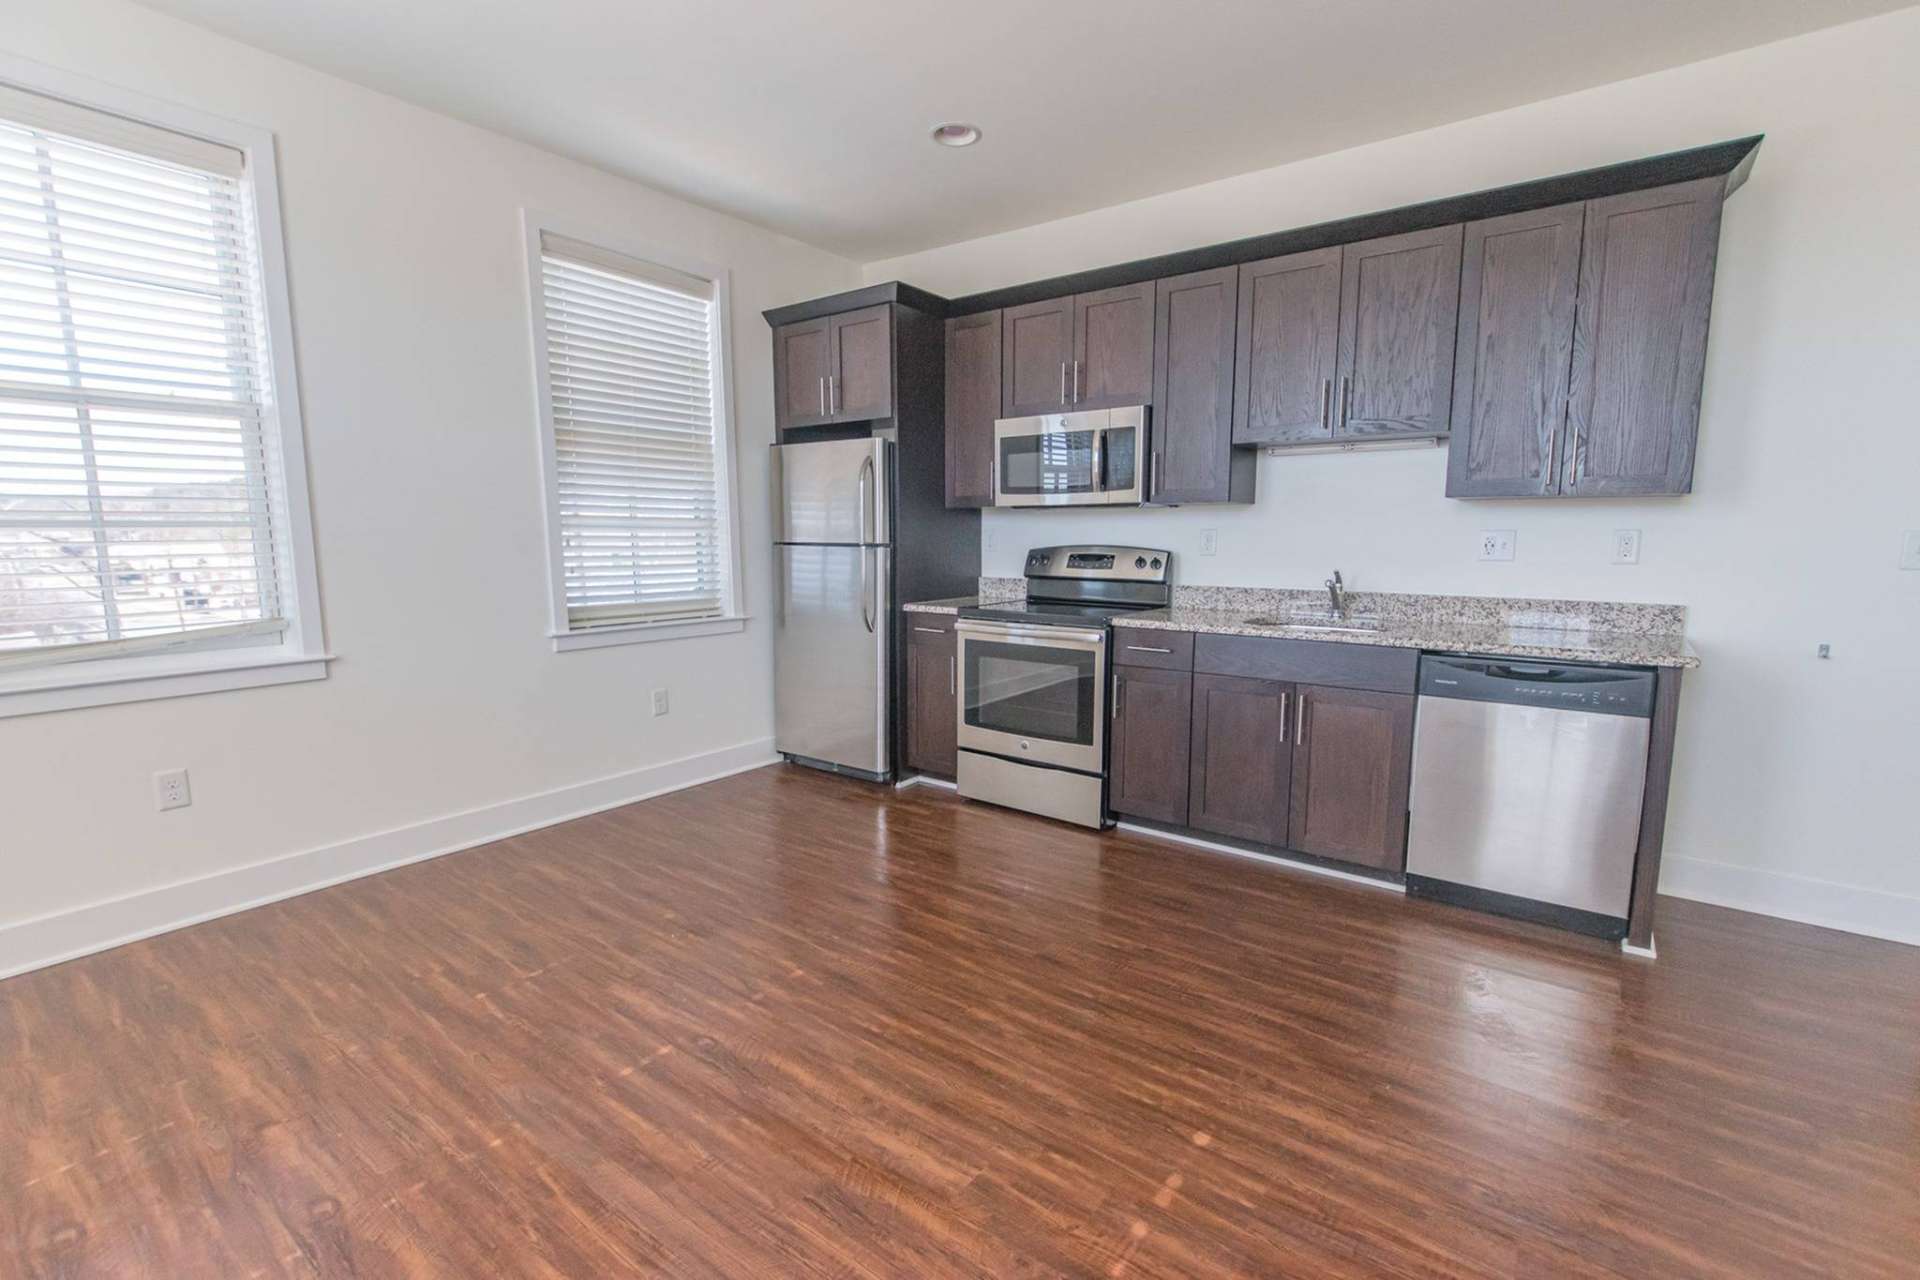 Spacious kitchen area with stainless steel appliances, two windows, and dark wooden cabinets.